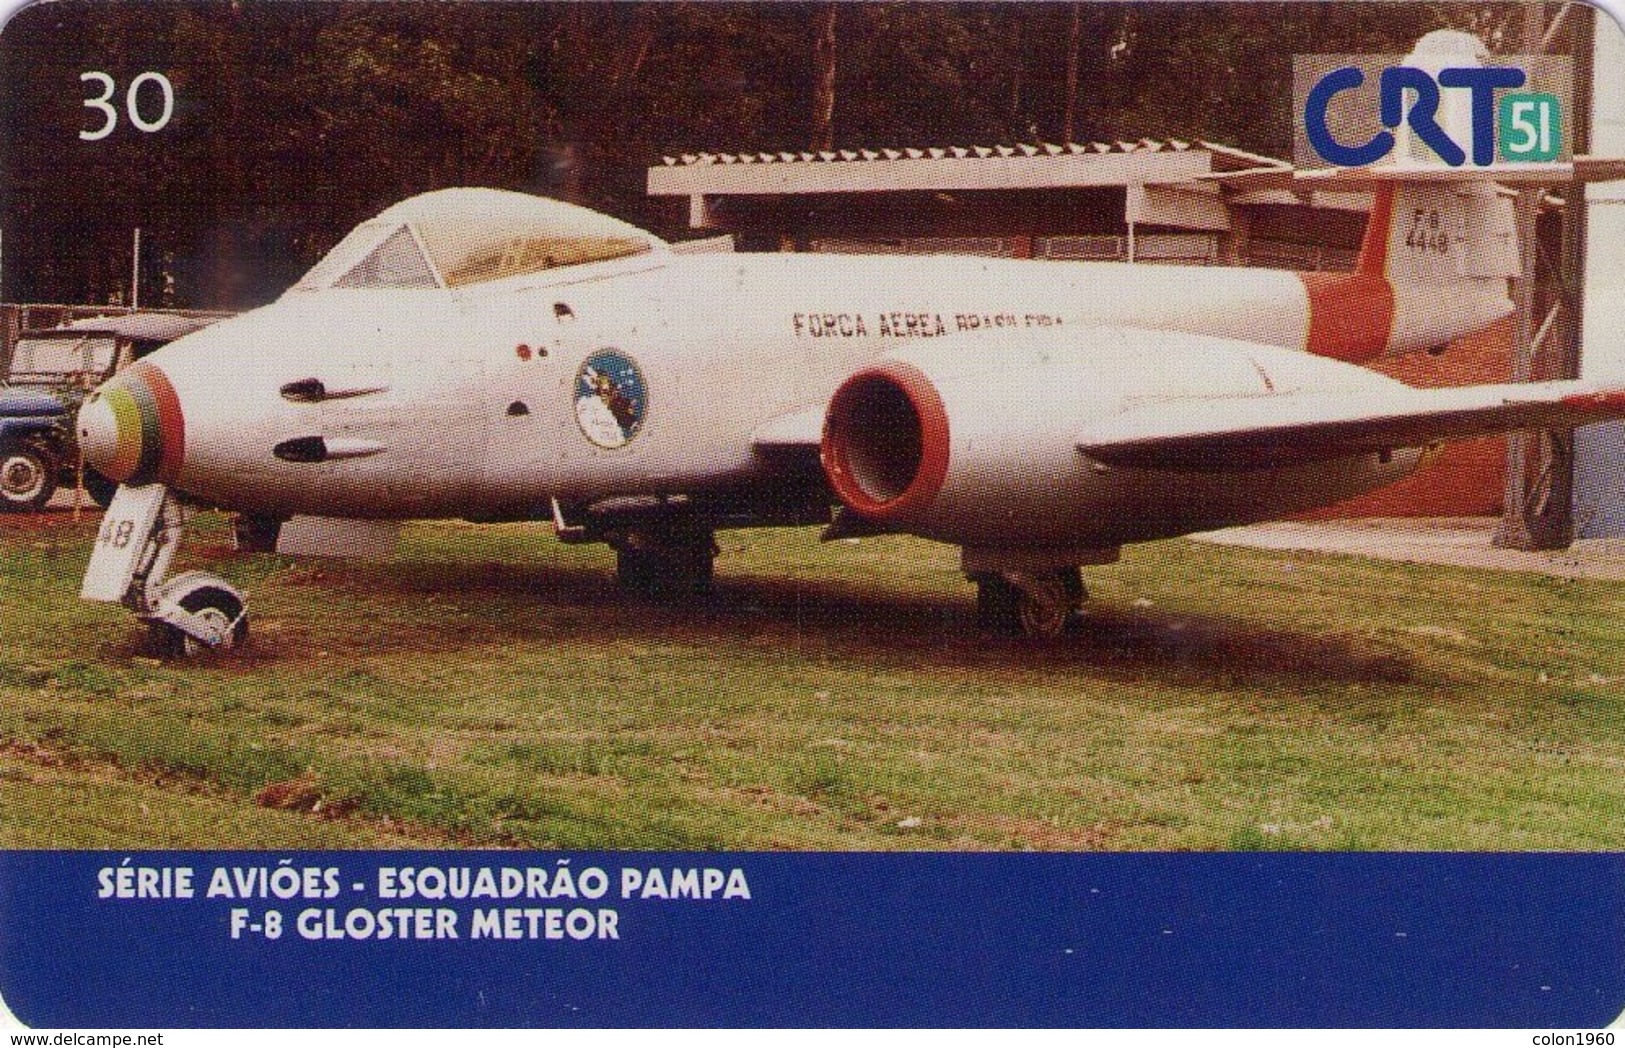 BRASIL. ESCUADRON PAMPA. F-8 GLOSTER METEOR - 11/99. (077) - Airplanes